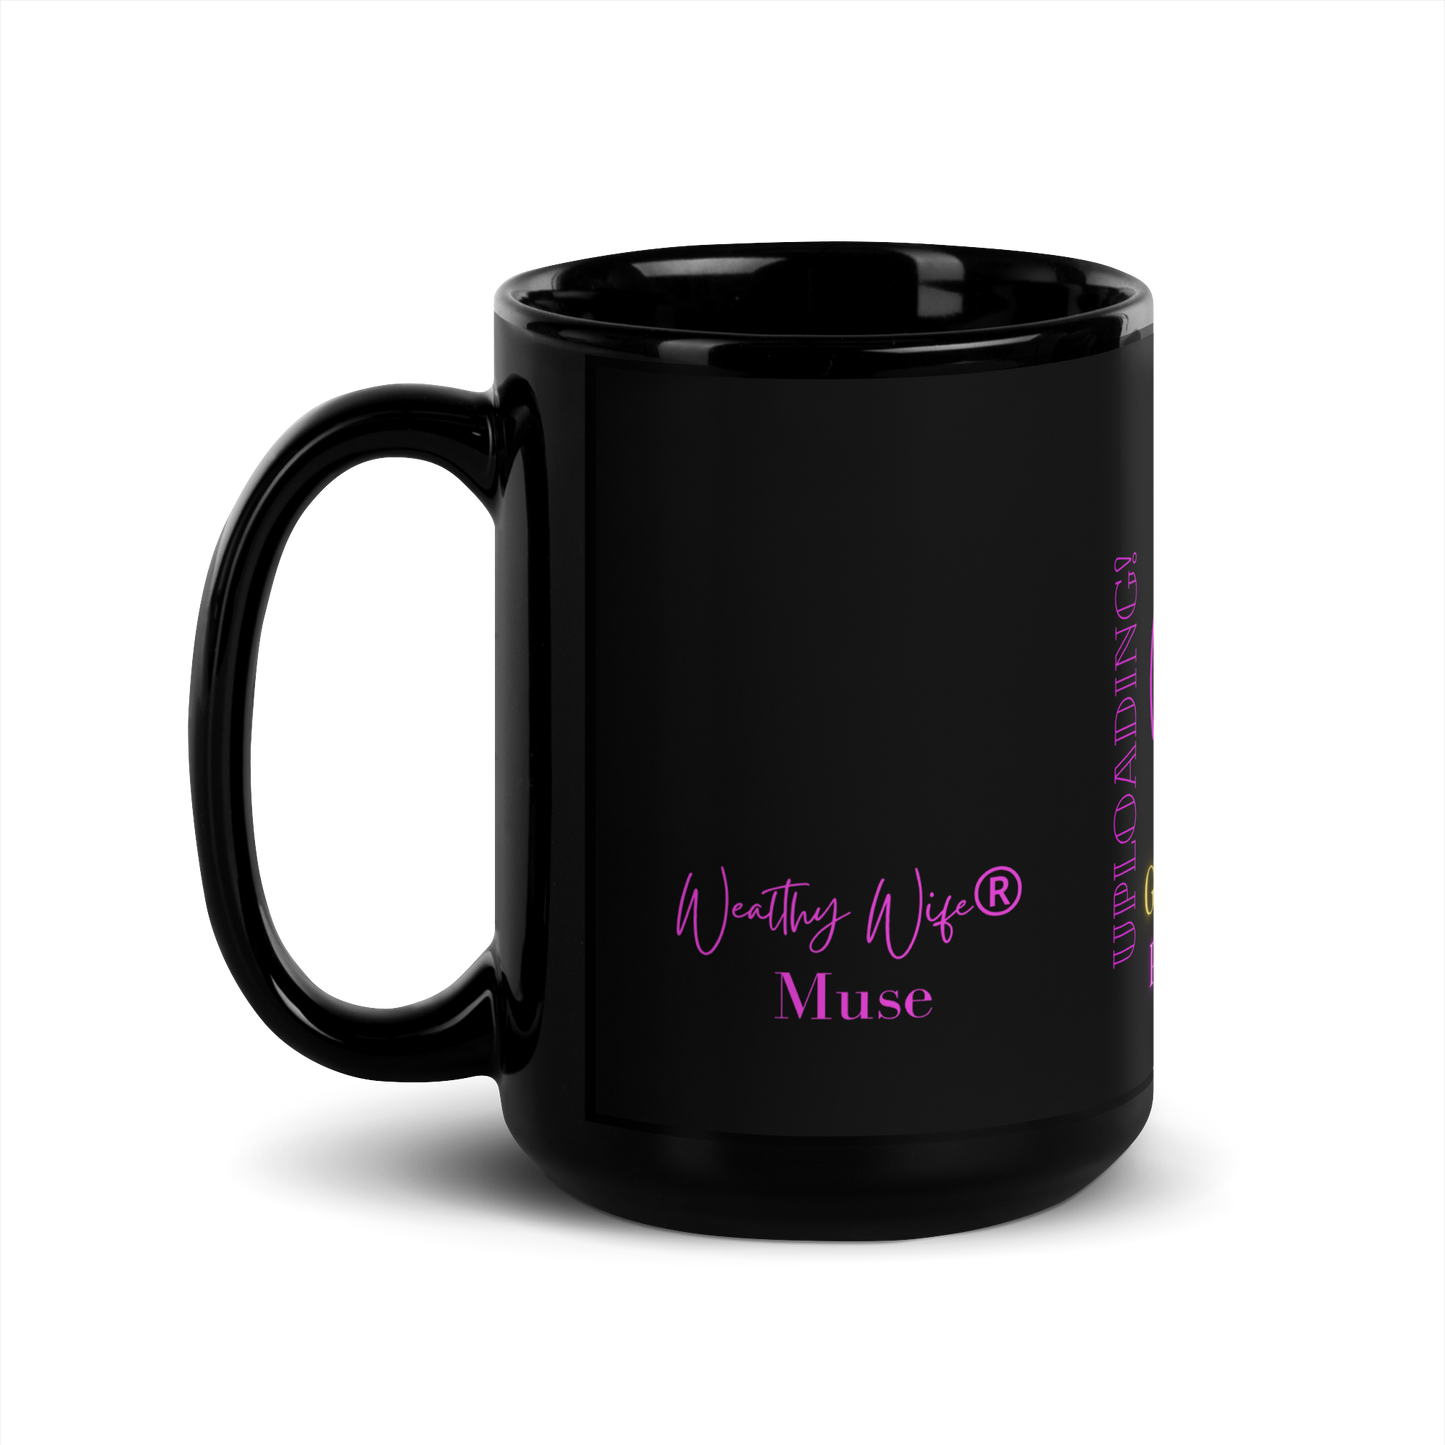 Wealthy Wife®’s Quote/Statement Black Glossy Mug